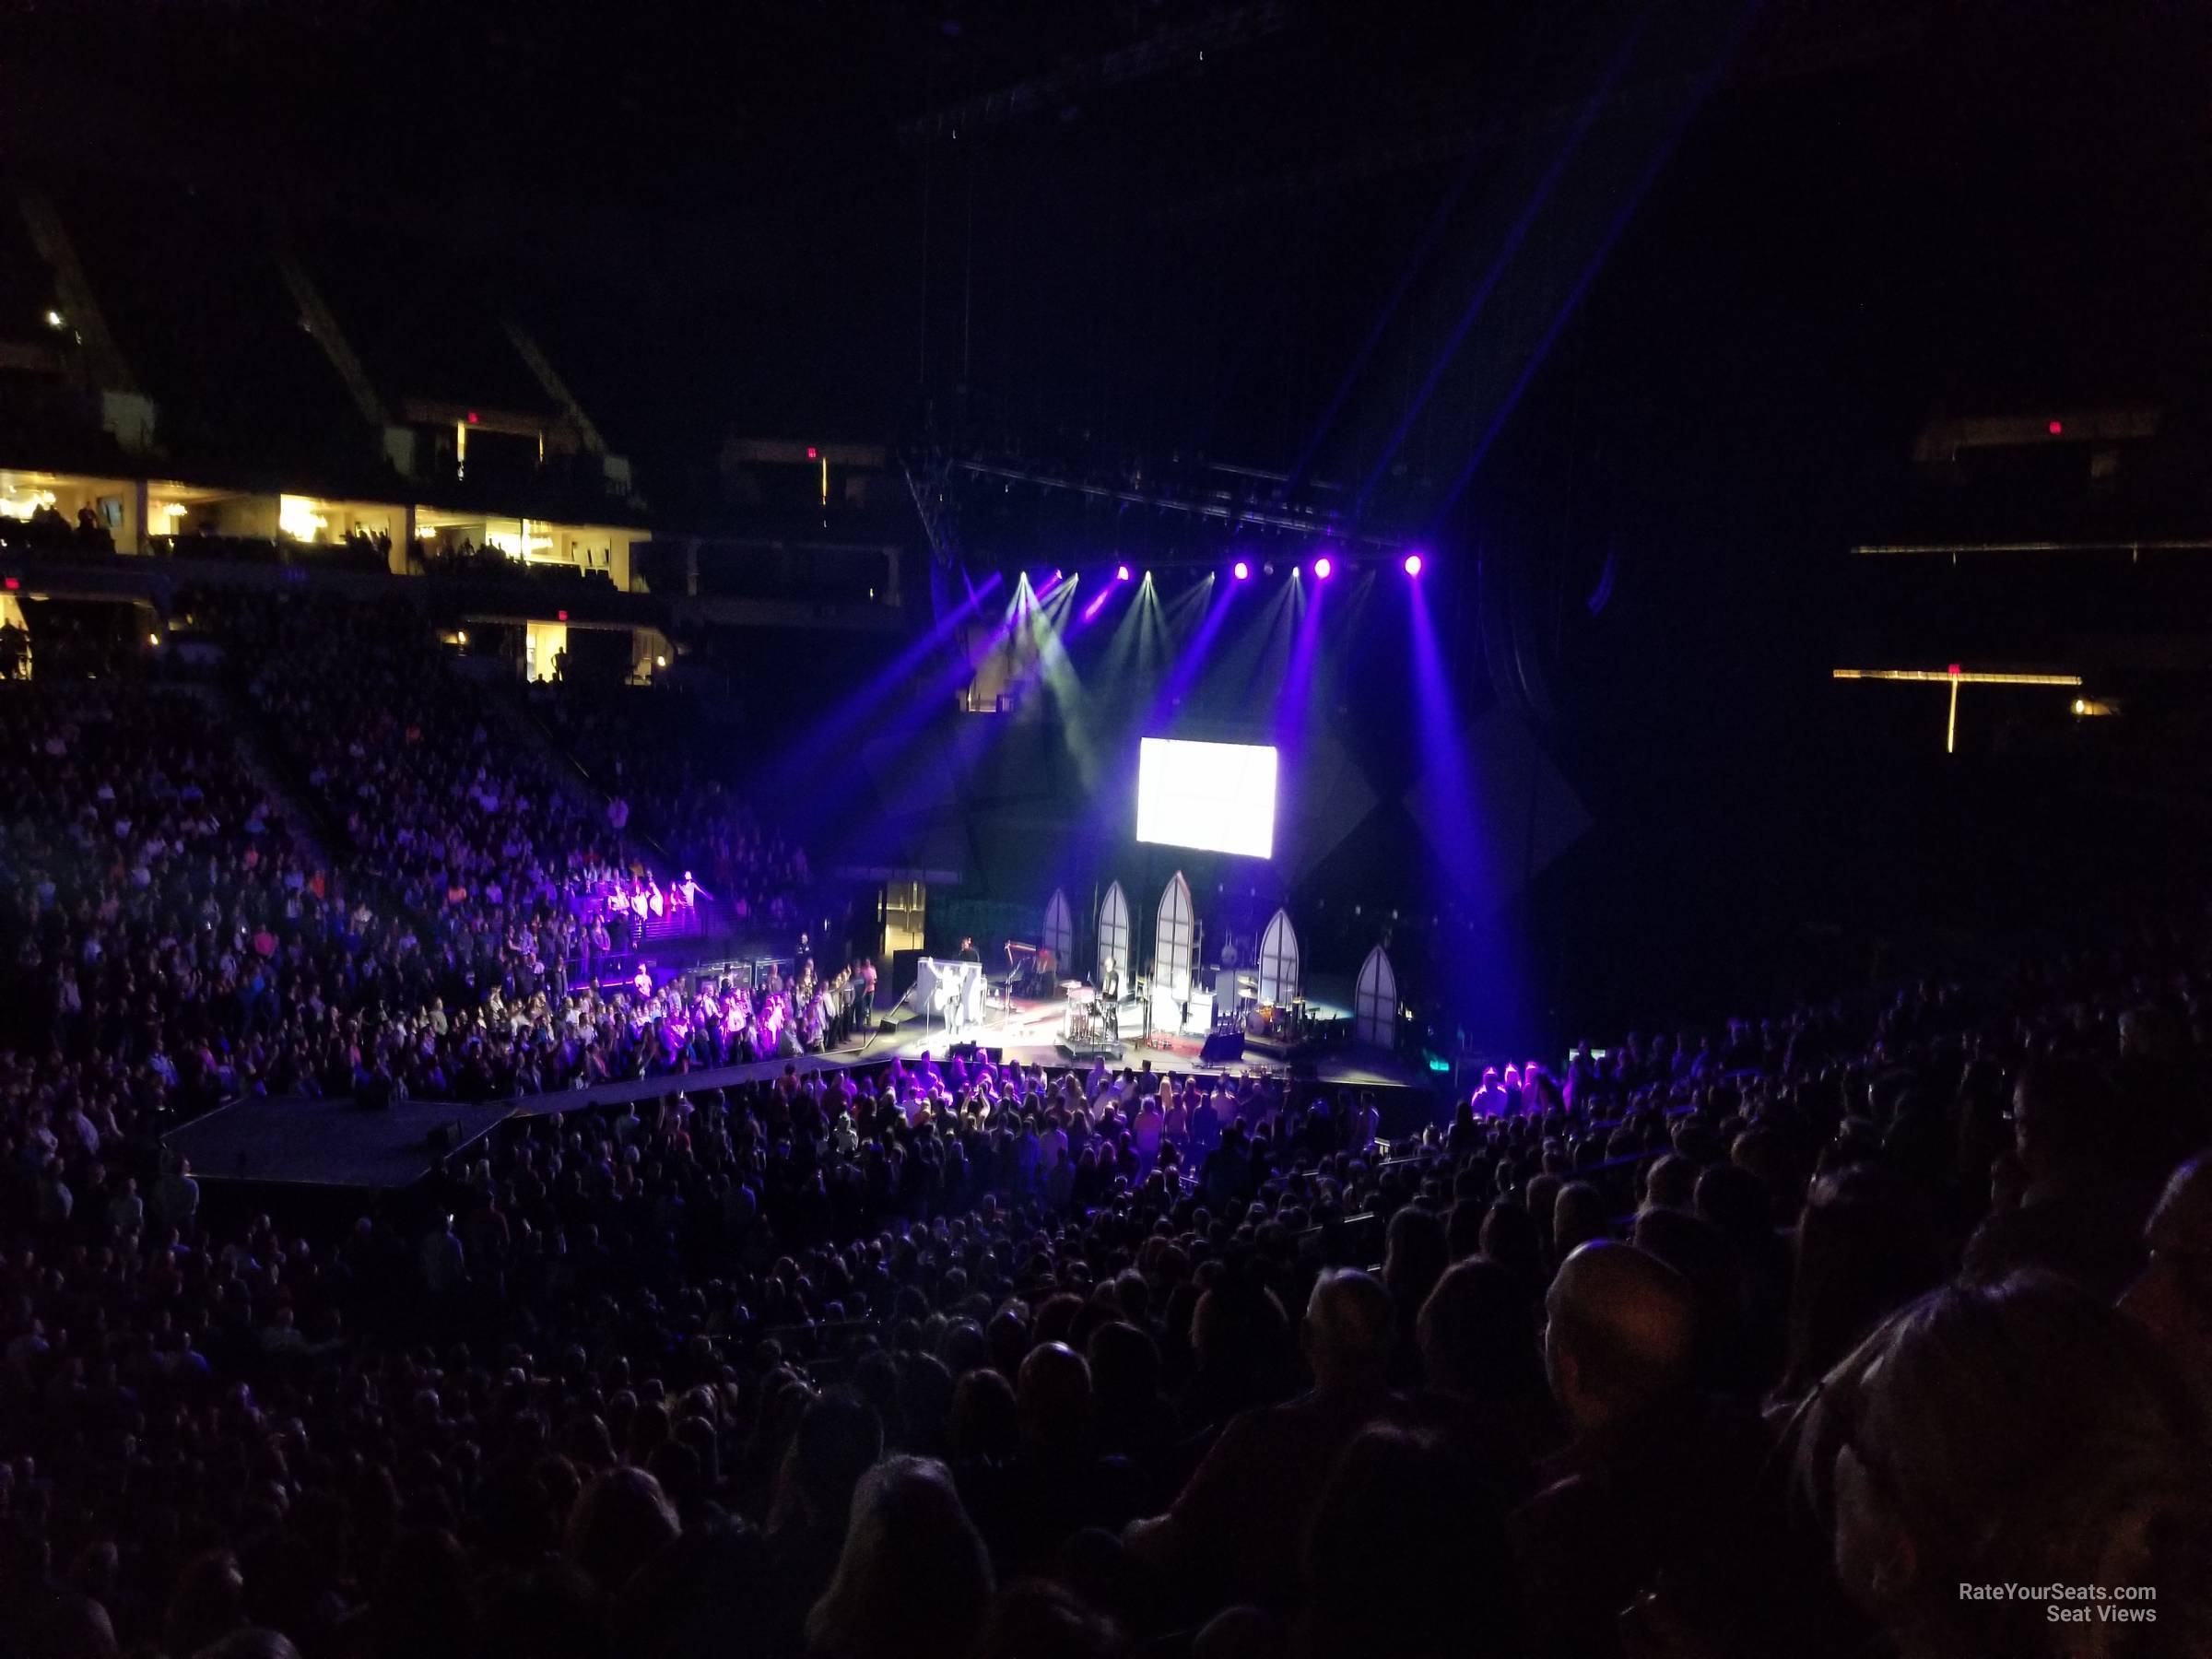 section 131, row u seat view  for concert - target center